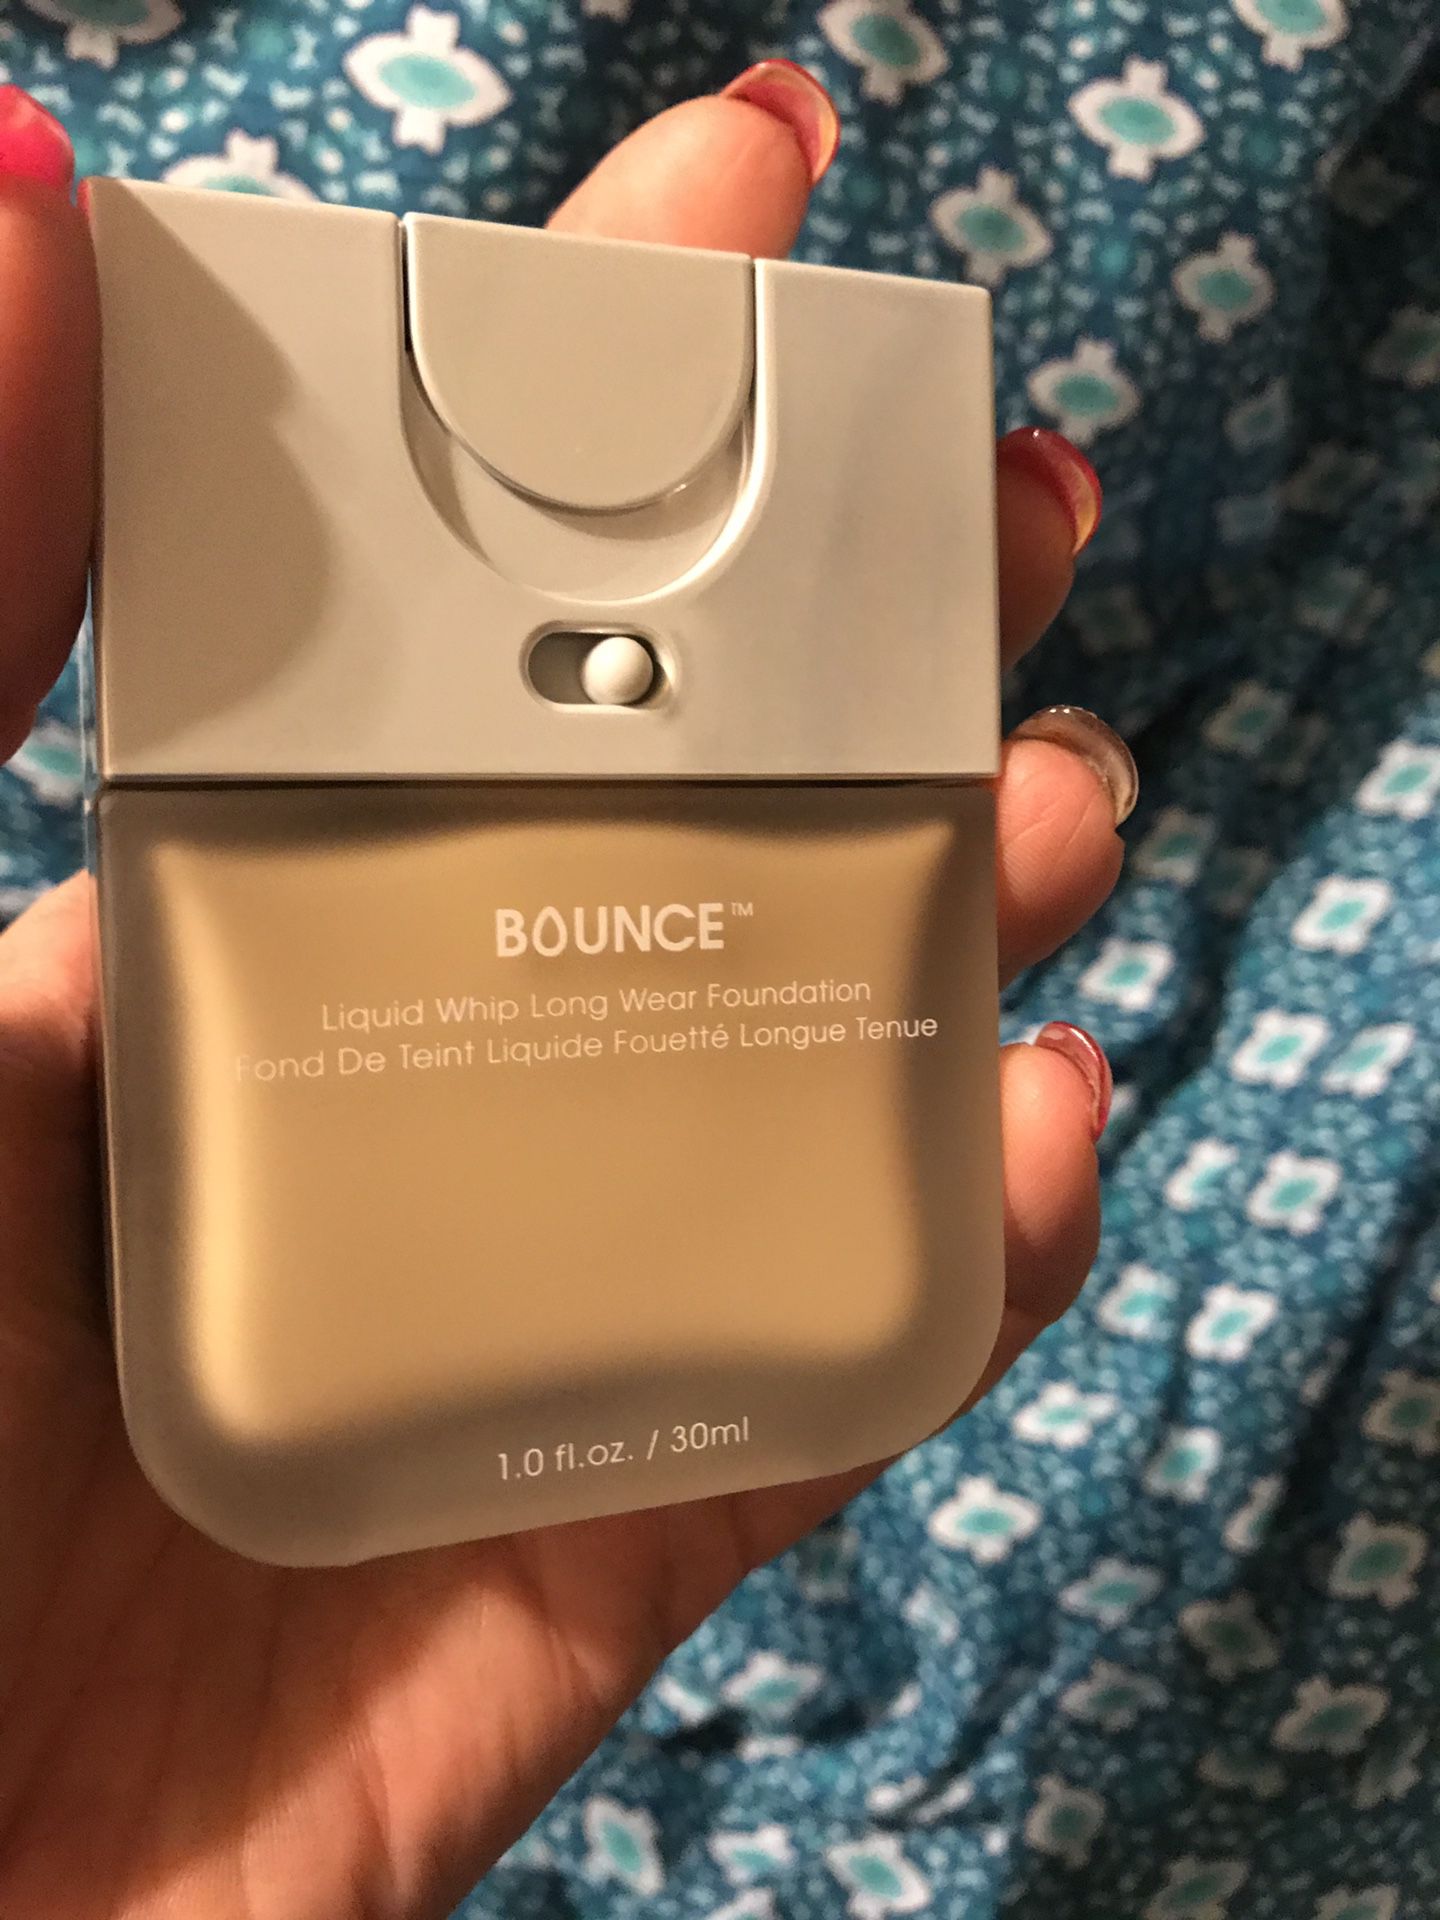 Almost new beauty blender make up foundation paid over $48